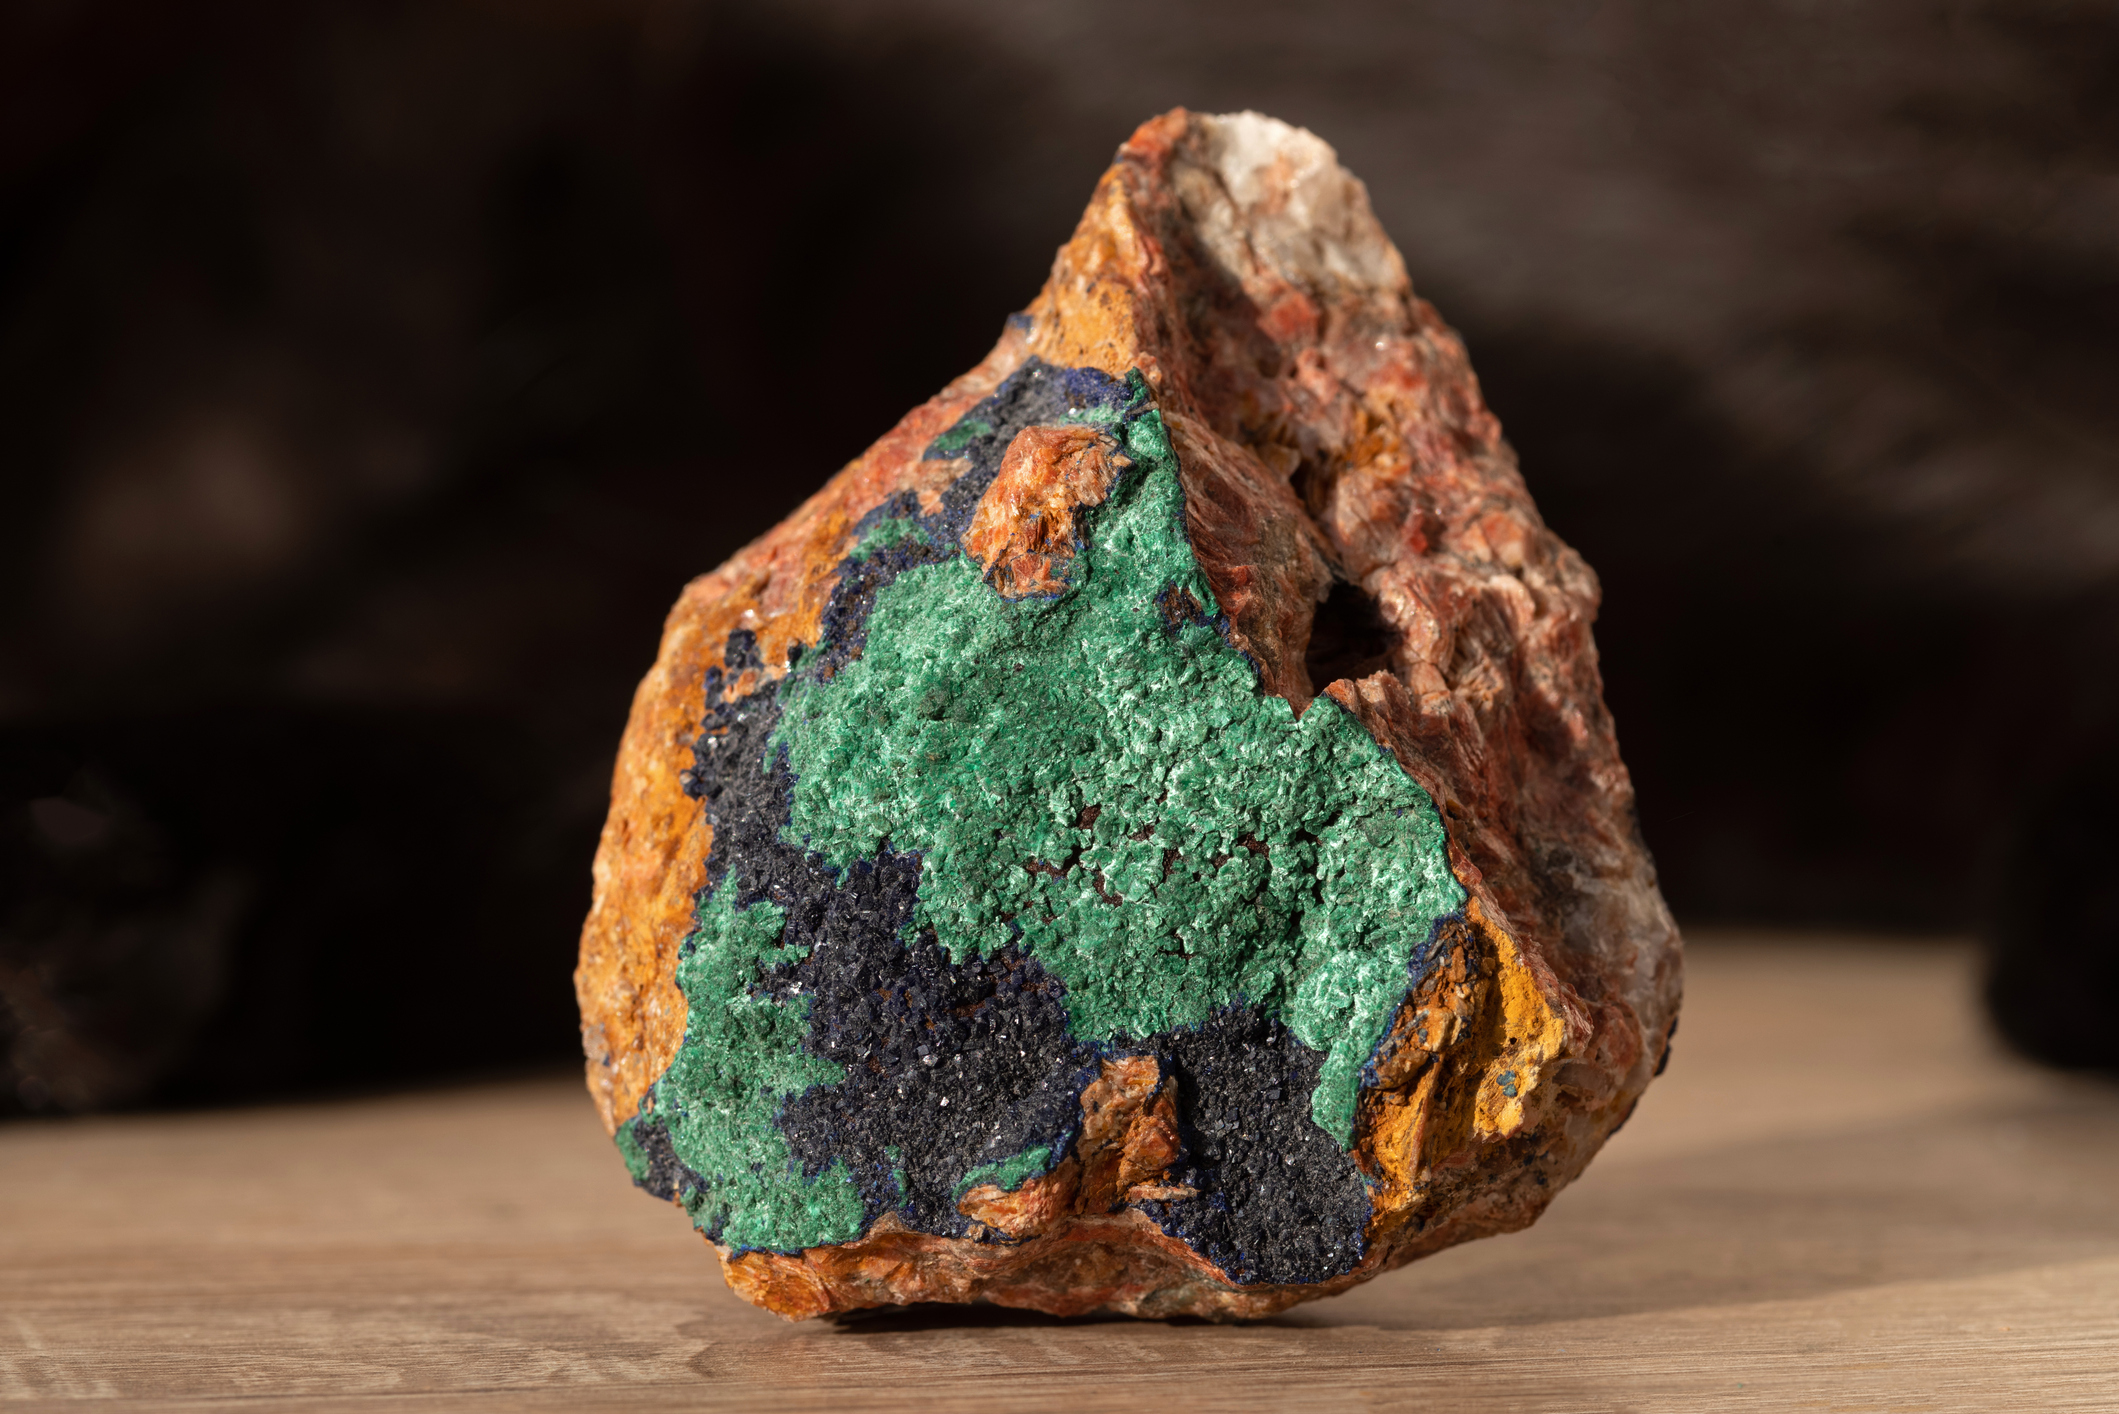 In nature, copper occurs as part of many minerals.